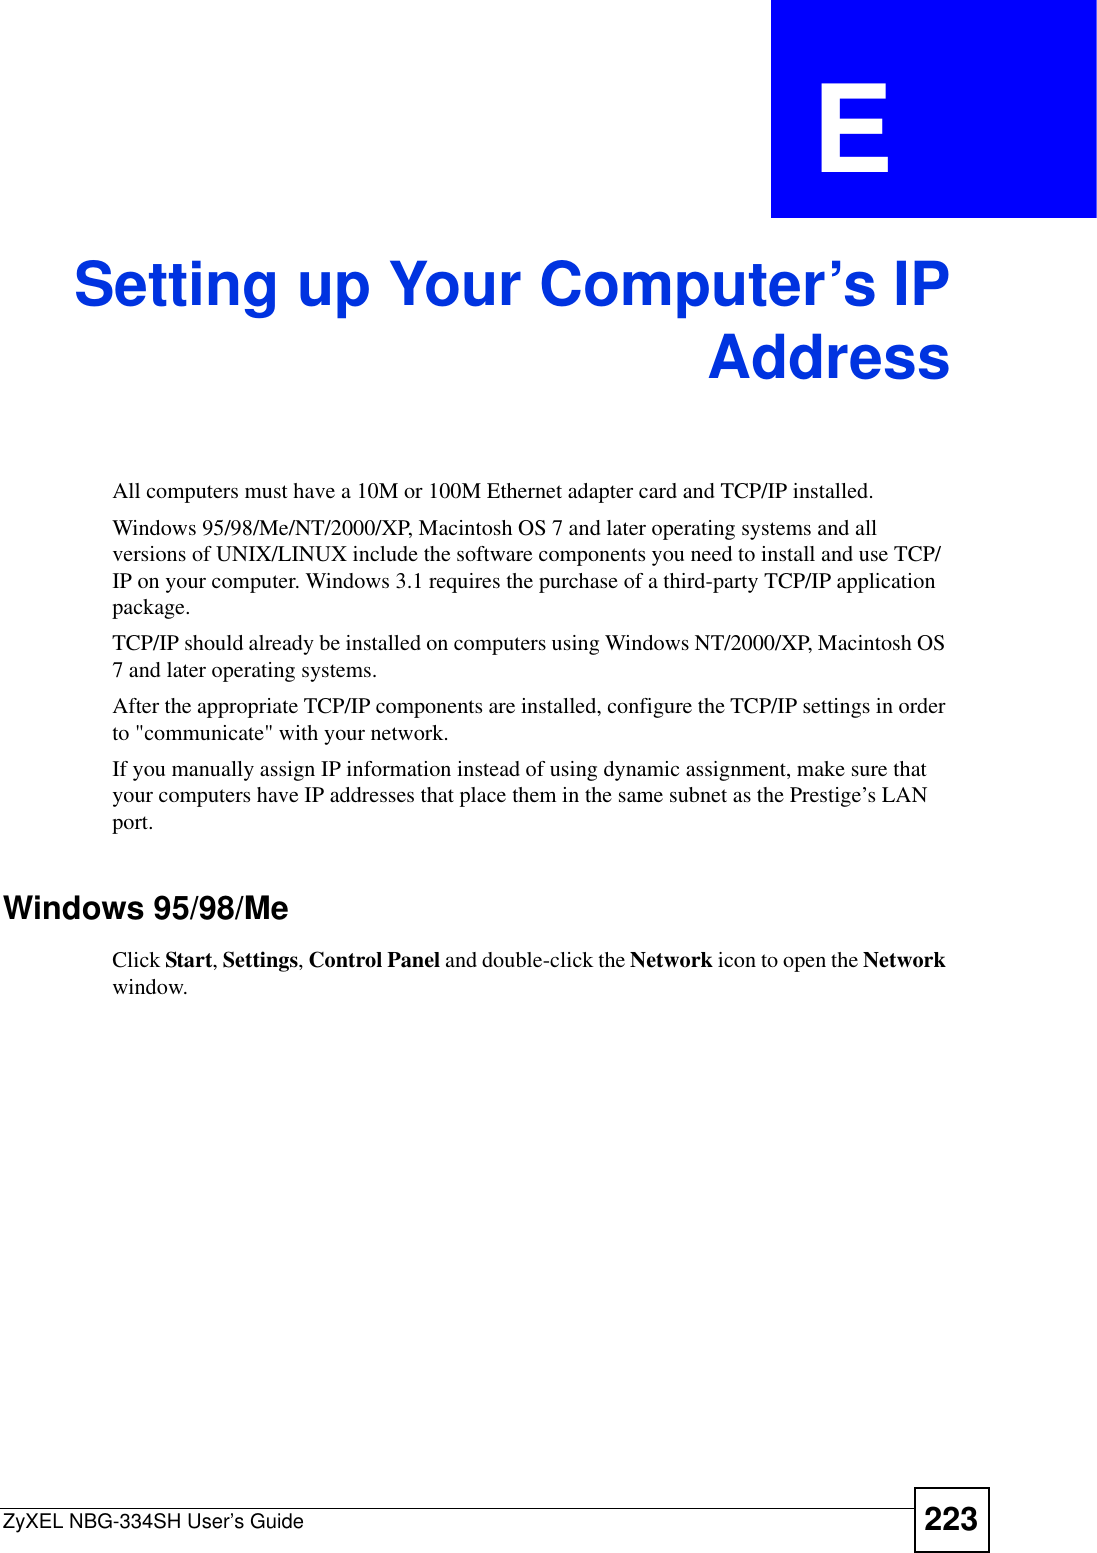 ZyXEL NBG-334SH User’s Guide 223APPENDIX  E Setting up Your Computer’s IPAddressAll computers must have a 10M or 100M Ethernet adapter card and TCP/IP installed. Windows 95/98/Me/NT/2000/XP, Macintosh OS 7 and later operating systems and all versions of UNIX/LINUX include the software components you need to install and use TCP/IP on your computer. Windows 3.1 requires the purchase of a third-party TCP/IP application package.TCP/IP should already be installed on computers using Windows NT/2000/XP, Macintosh OS 7 and later operating systems.After the appropriate TCP/IP components are installed, configure the TCP/IP settings in order to &quot;communicate&quot; with your network. If you manually assign IP information instead of using dynamic assignment, make sure that your computers have IP addresses that place them in the same subnet as the Prestige’s LAN port.Windows 95/98/MeClick Start,Settings,Control Panel and double-click the Network icon to open the Network window.